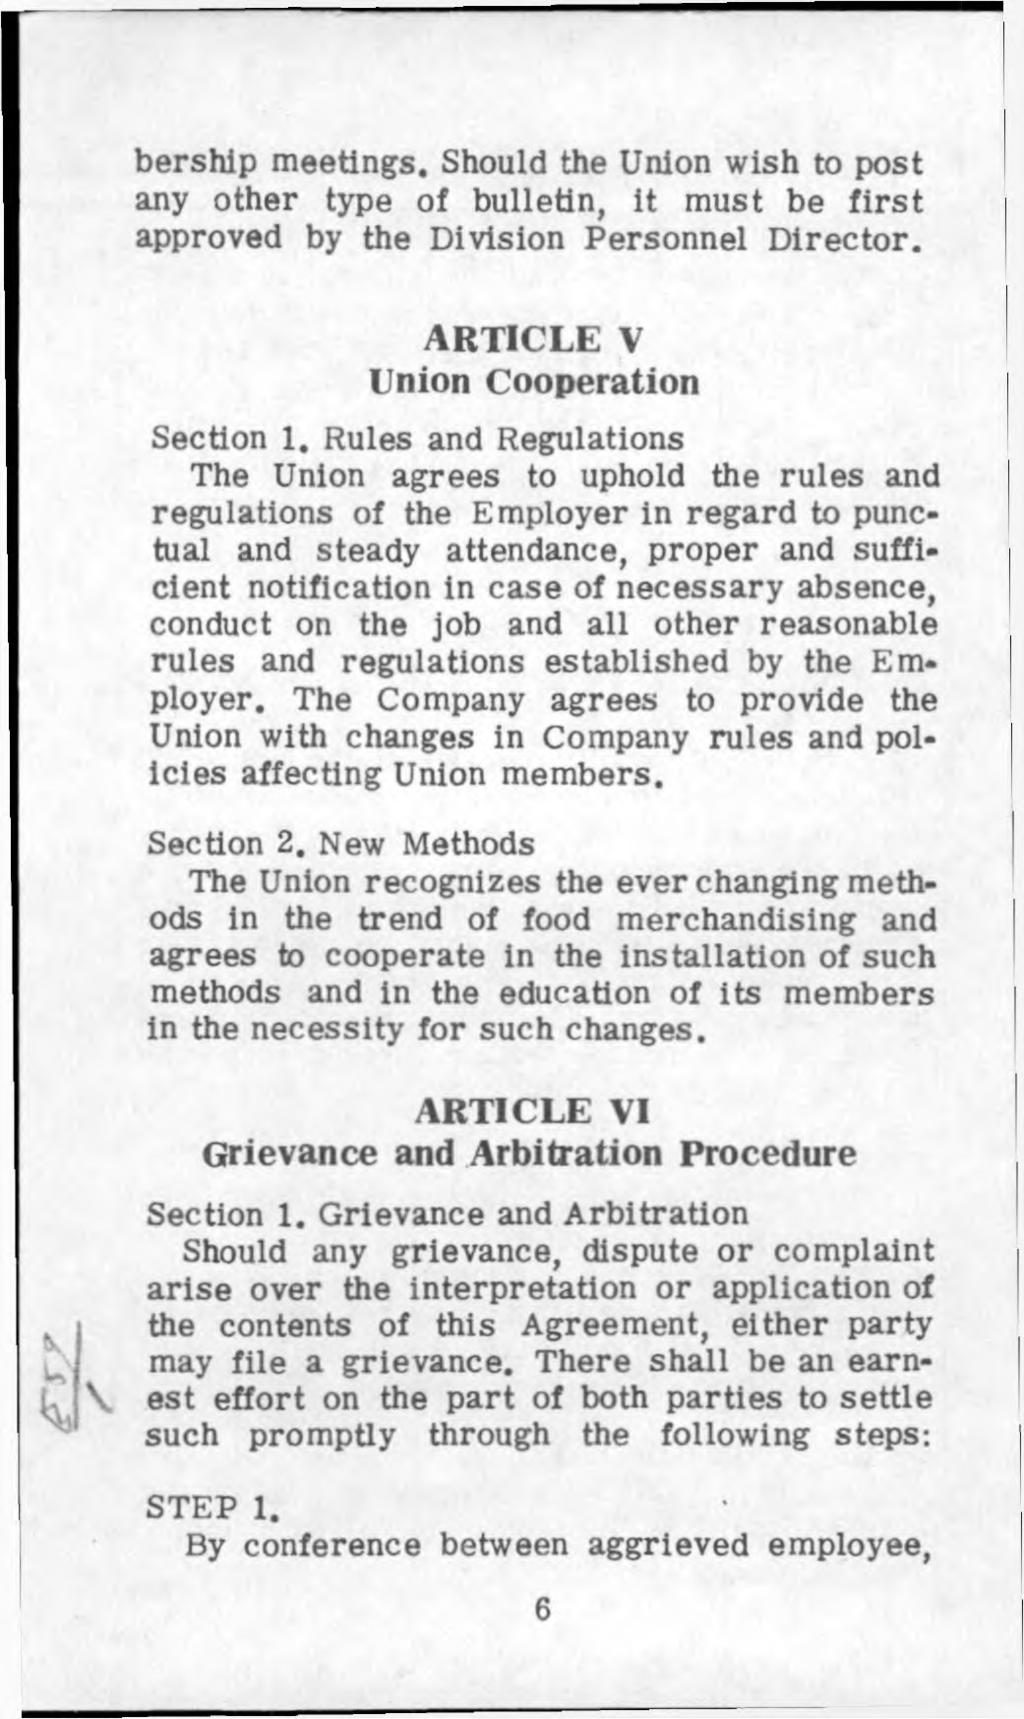 bership meetings. Should the Union wish to post any other type of bulletin, It must be first approved by the Division Personnel Director. ARTICLE V Union Cooperation Section 1.